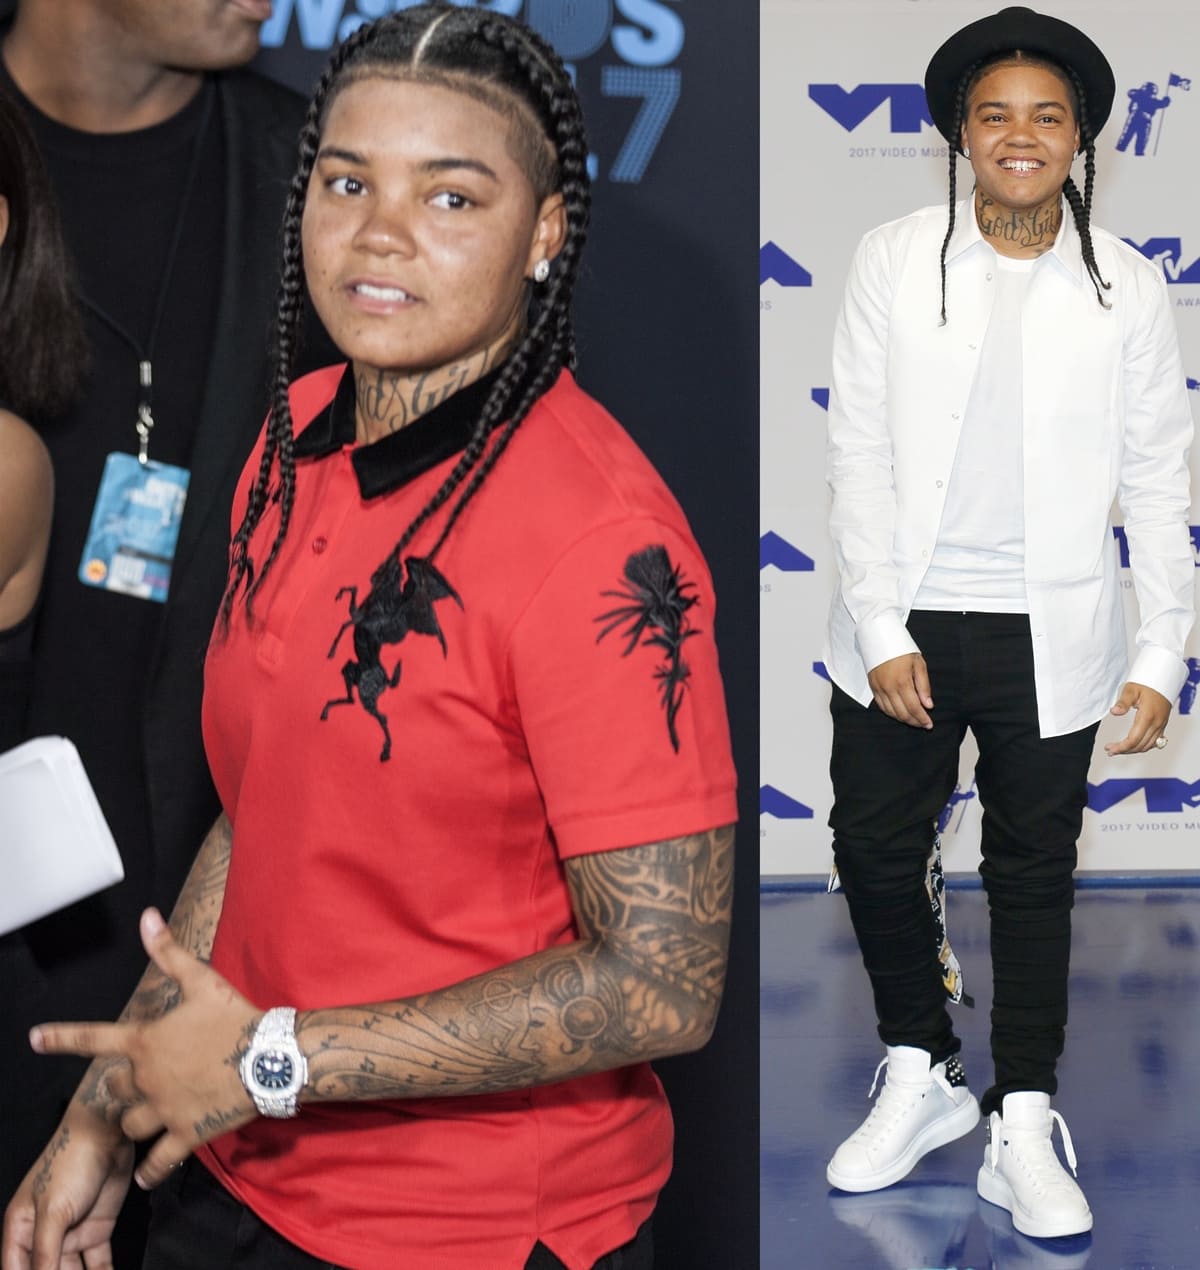 Katorah Kasanova Marrero, widely recognized as Young M.A, garnered fame in 2016 with the release of her quadruple-platinum hit single "Ooouuu," and while she has achieved notable success, her current net worth is estimated to be around $2 million